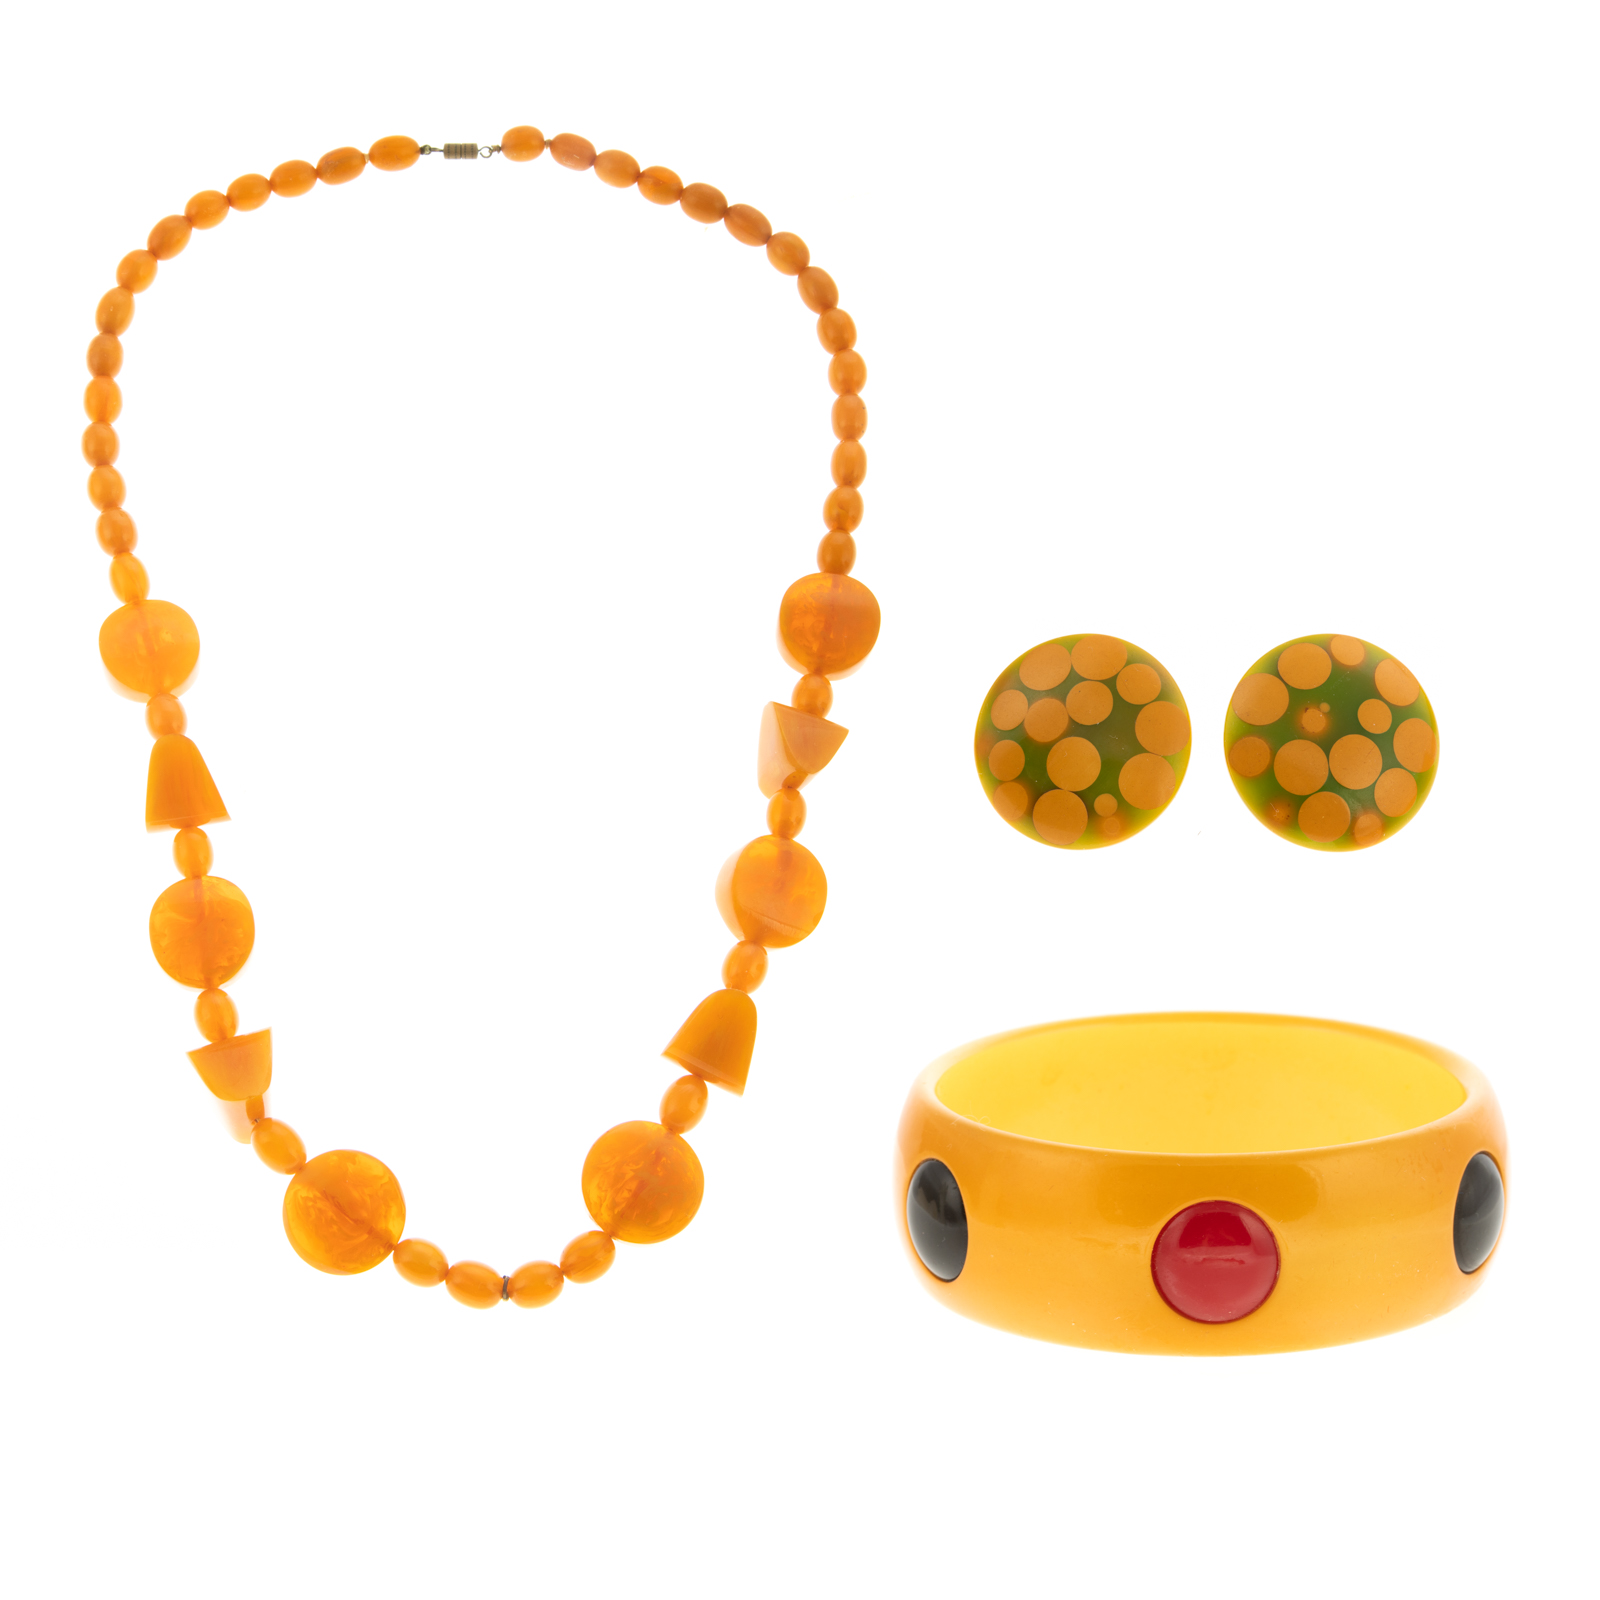 A COLLECTION OF BAKELITE JEWELRY 338639